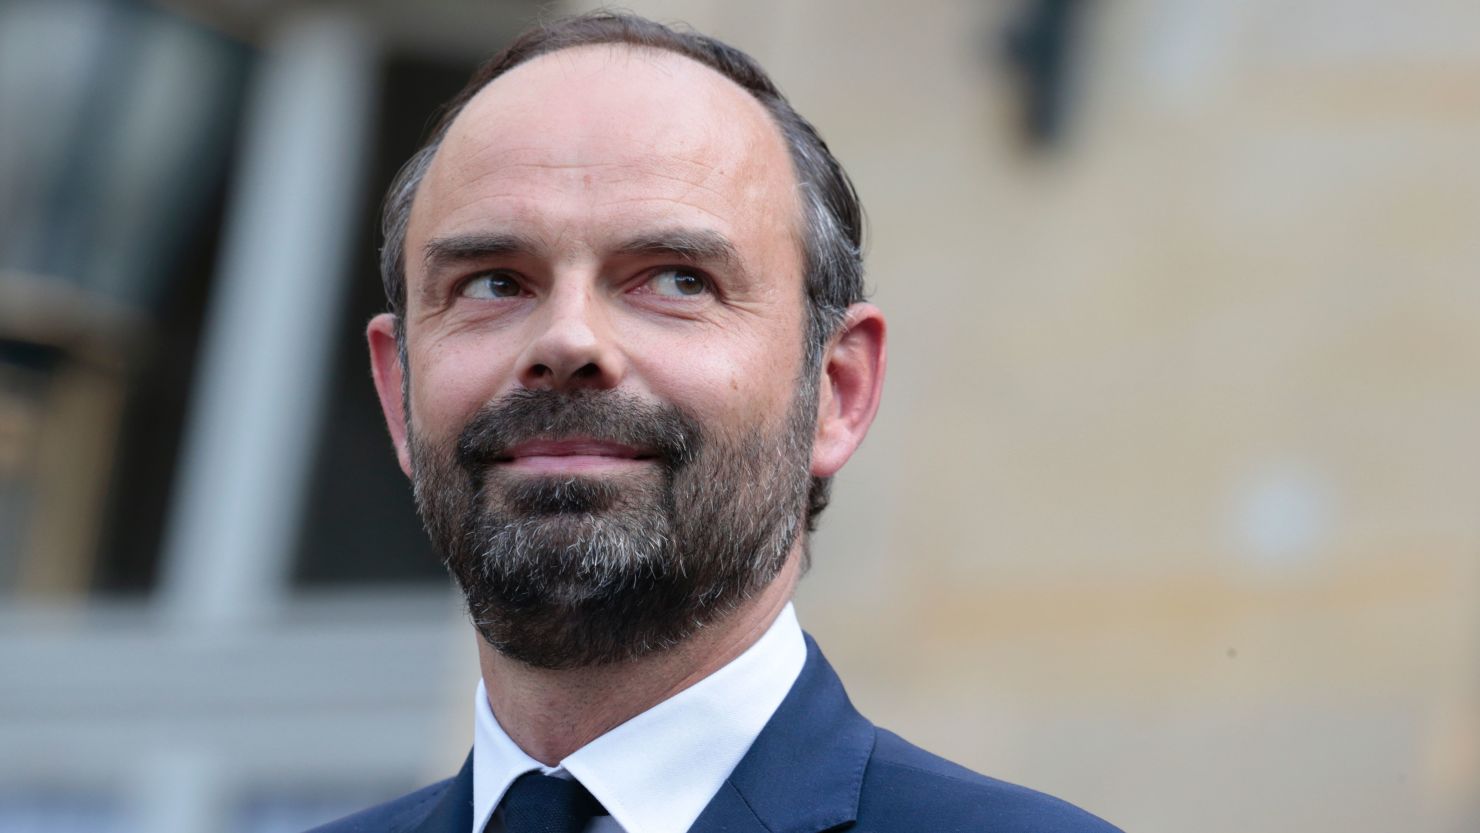 Macron chose Philippe in a bid to woo republican support.